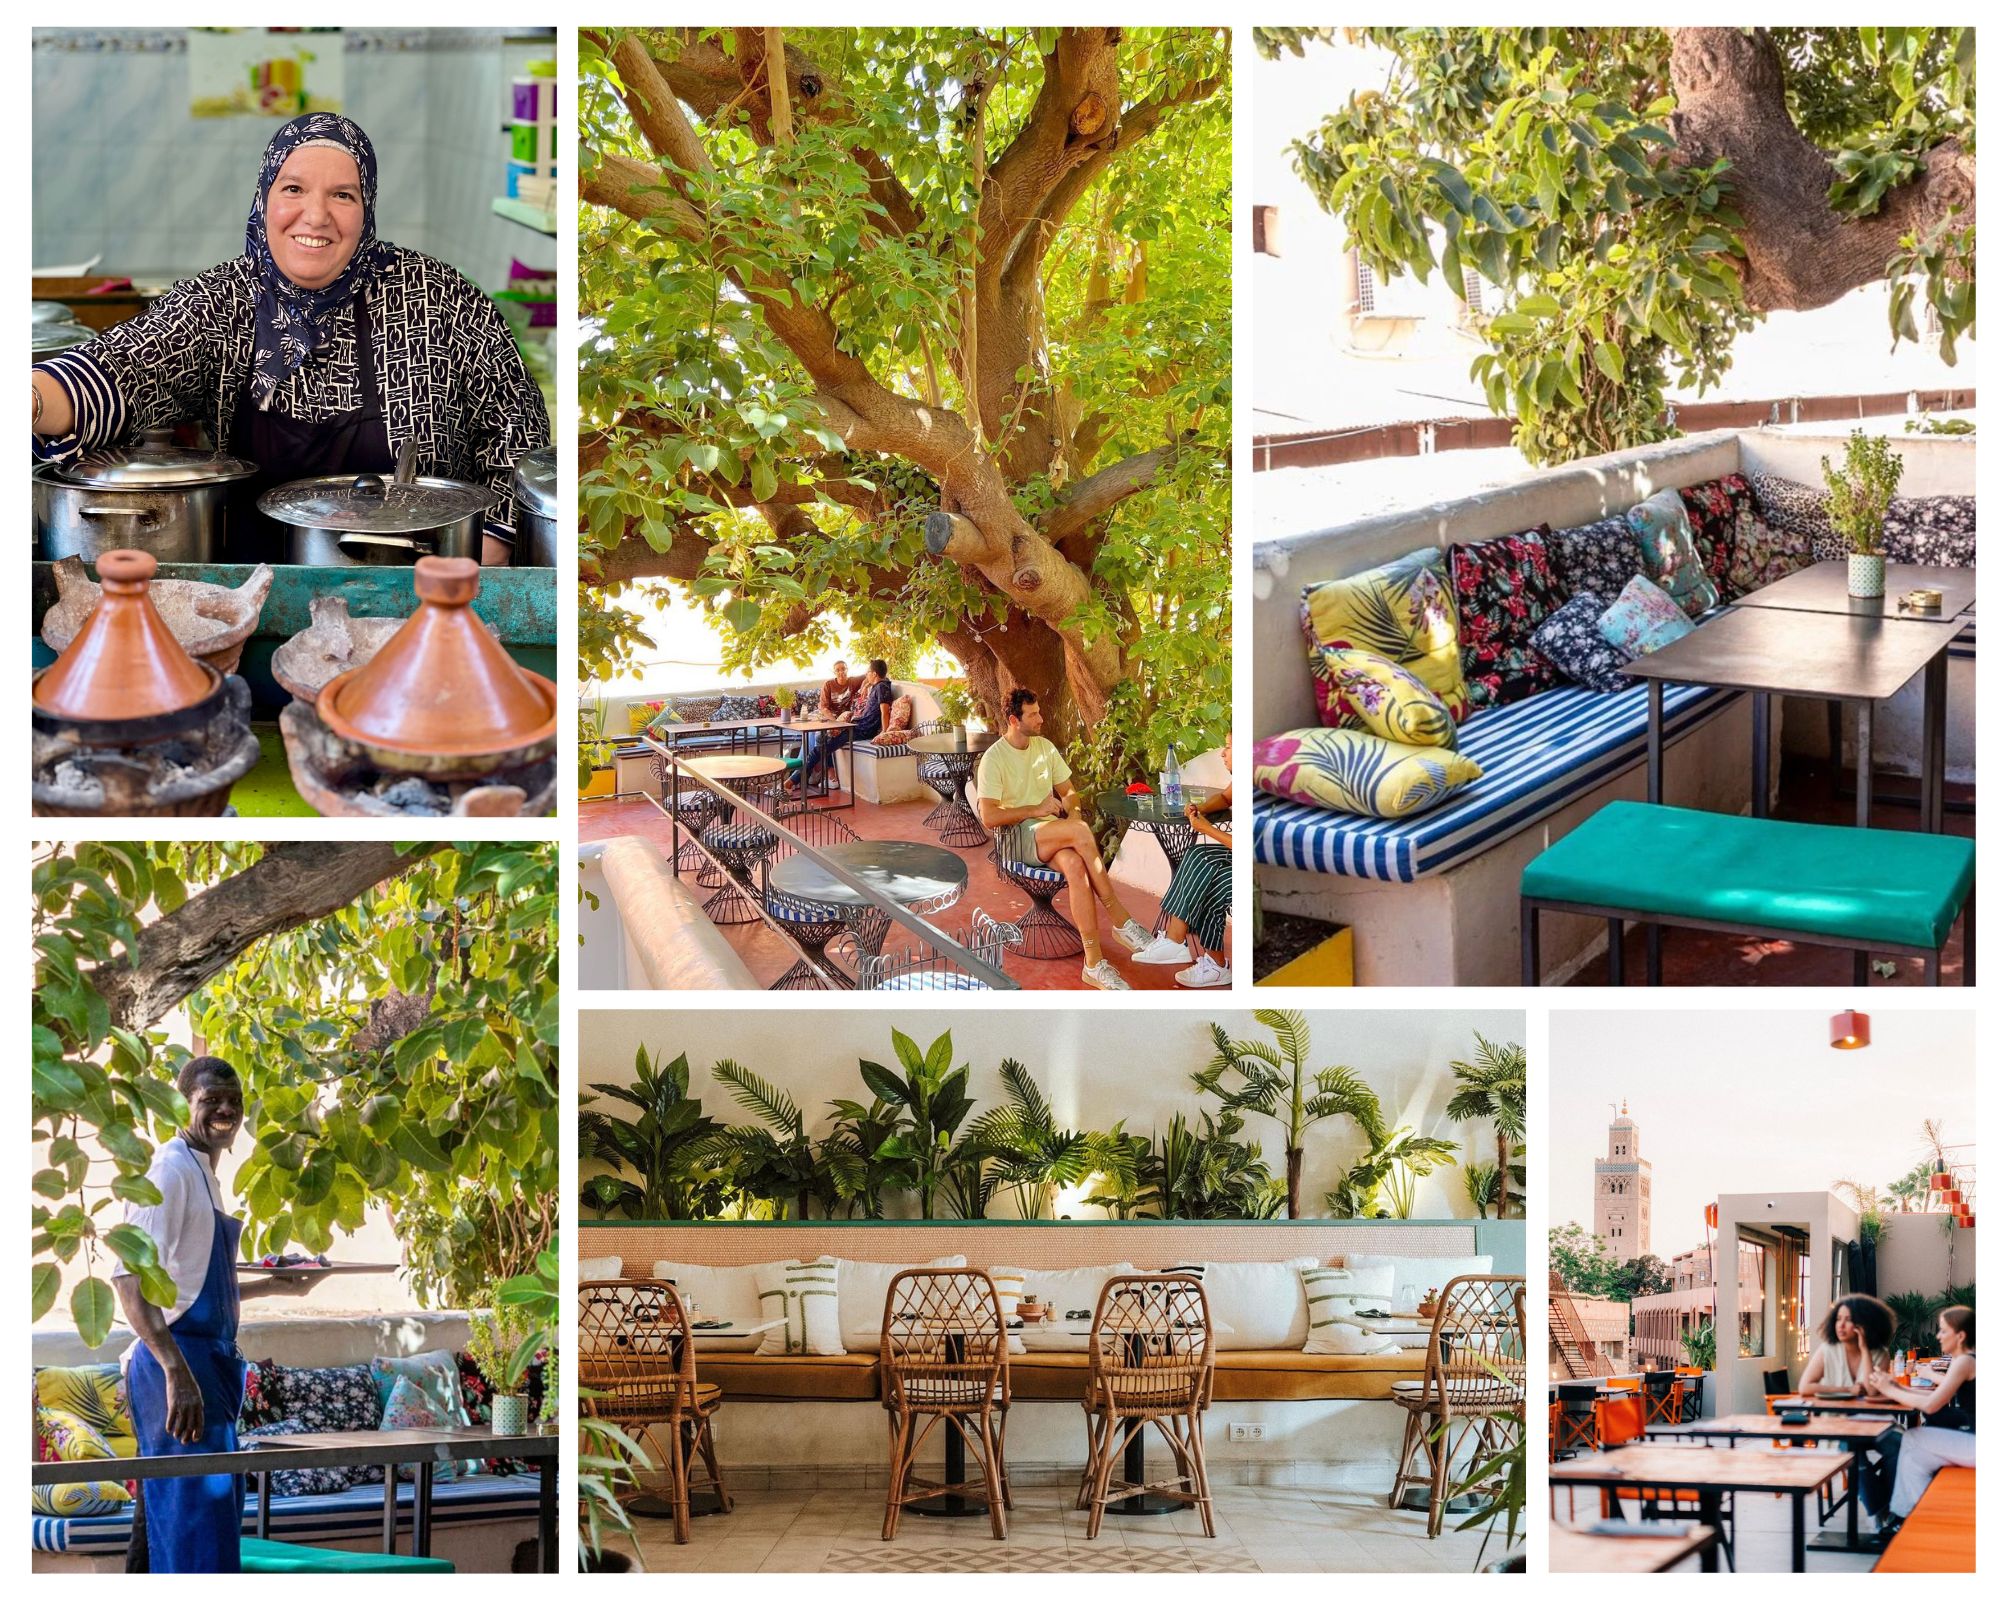 Top Places to eat lunch in Marrakech